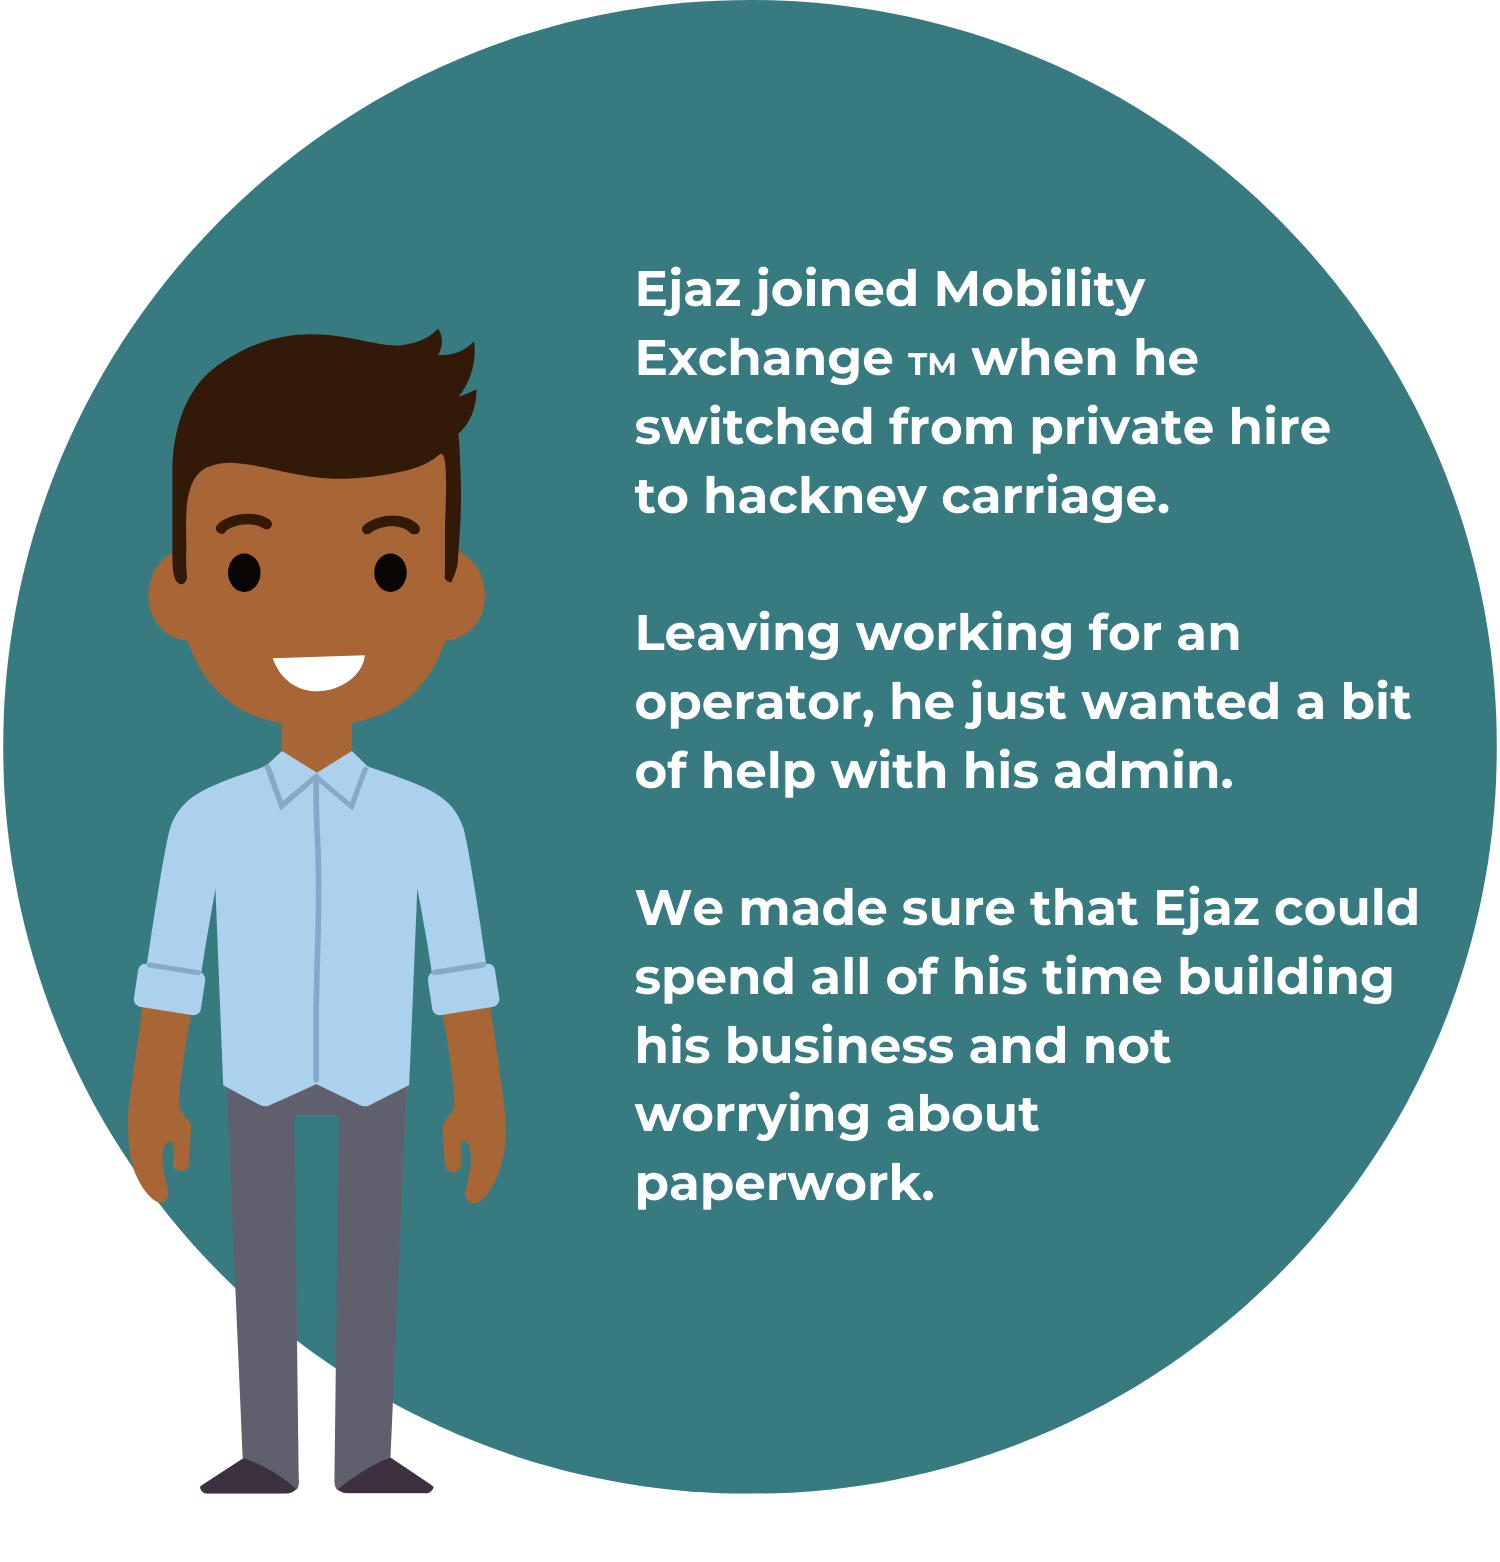 Ejaz joined Mobility Exchange TM when he switched from private hire to hackney carriage. Leaving an operator, he wanted a bit of help with his admin. We made sure that Ejaz could spend all of his time building his business and not worrying about paperwork.